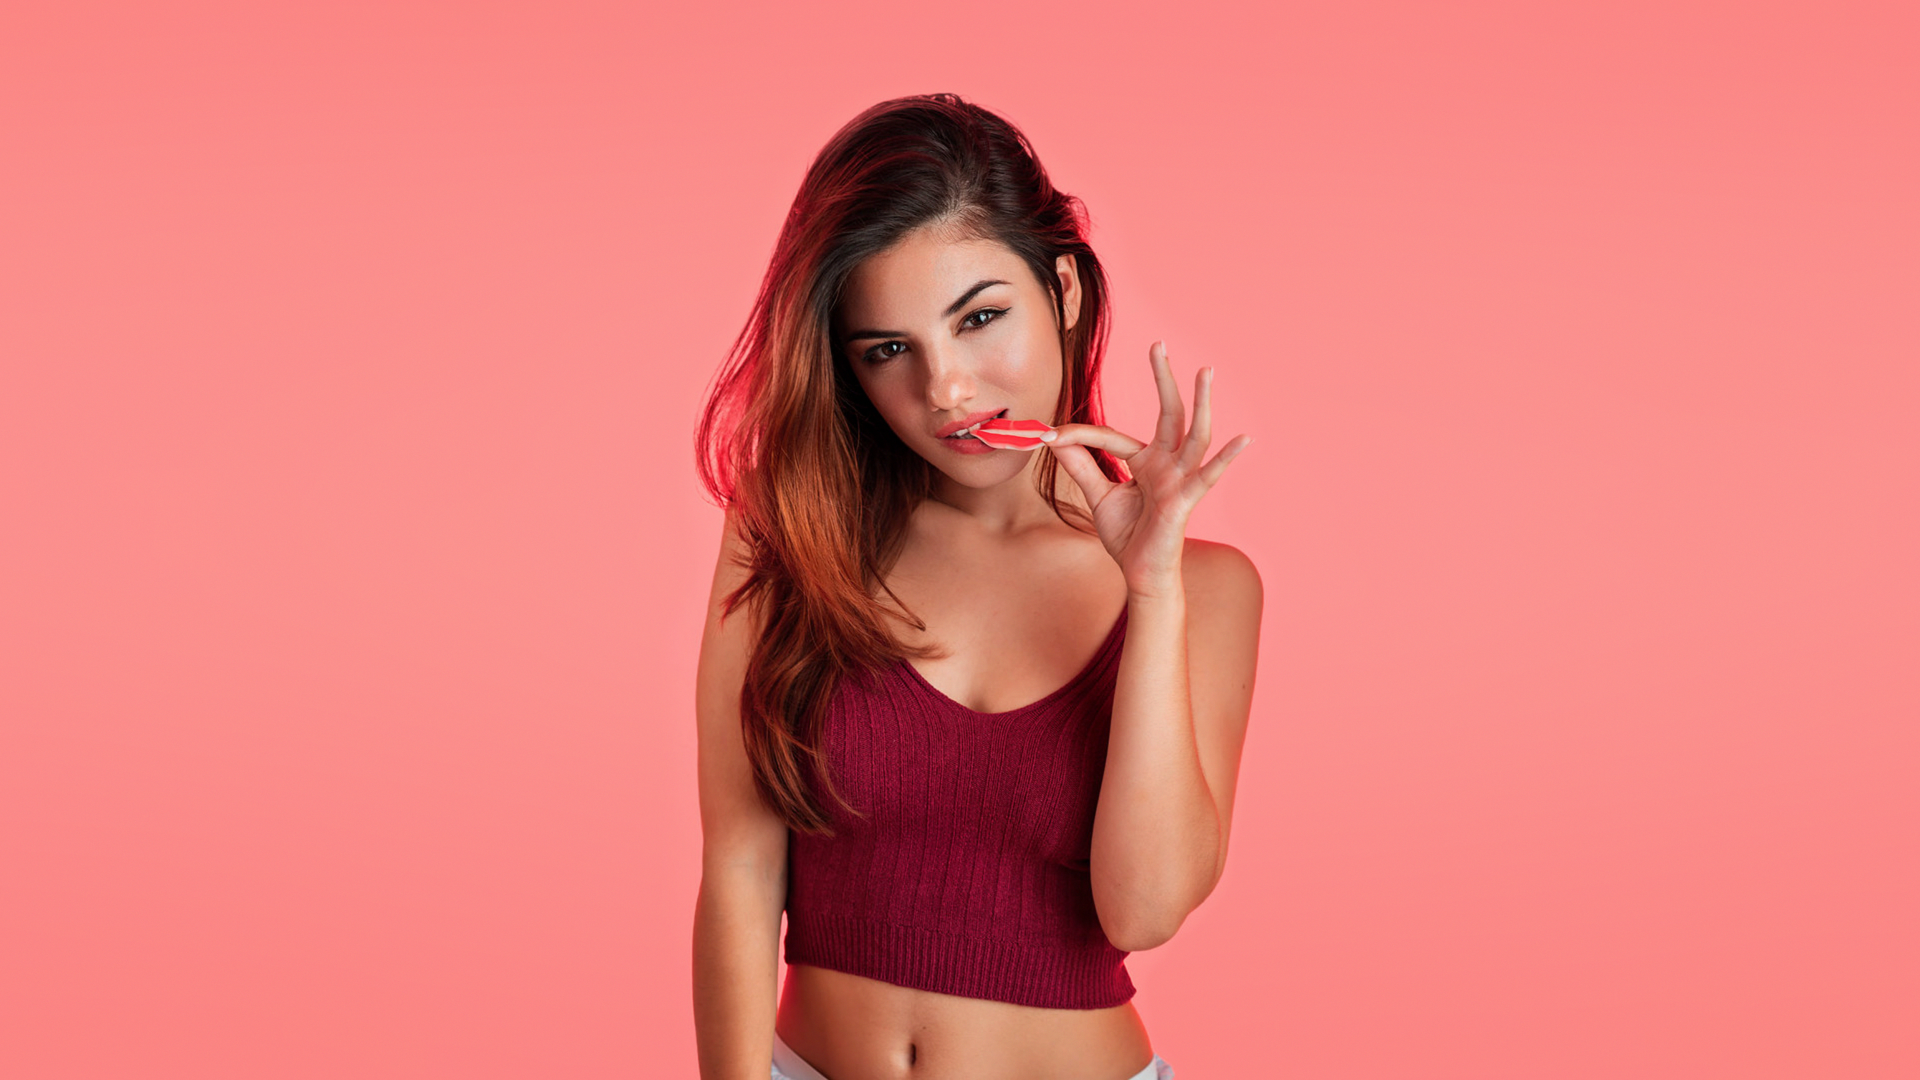 People 1920x1080 Delaia Gonzalez women model brunette portrait looking at viewer brown eyes sweets biting cleavage short tops red tops belly simple background pink background pink Gustavo Terzaghi